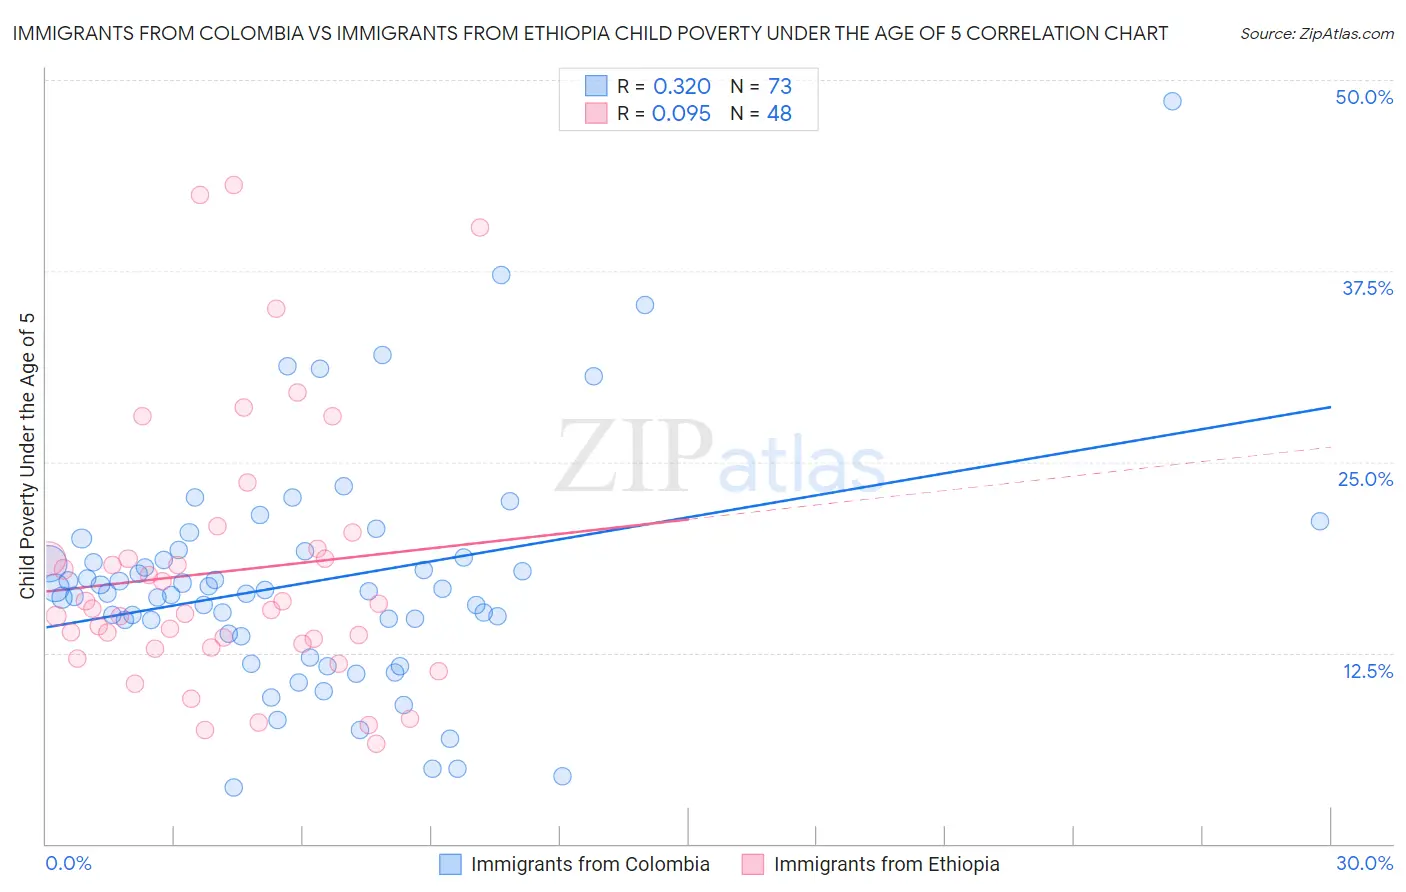 Immigrants from Colombia vs Immigrants from Ethiopia Child Poverty Under the Age of 5